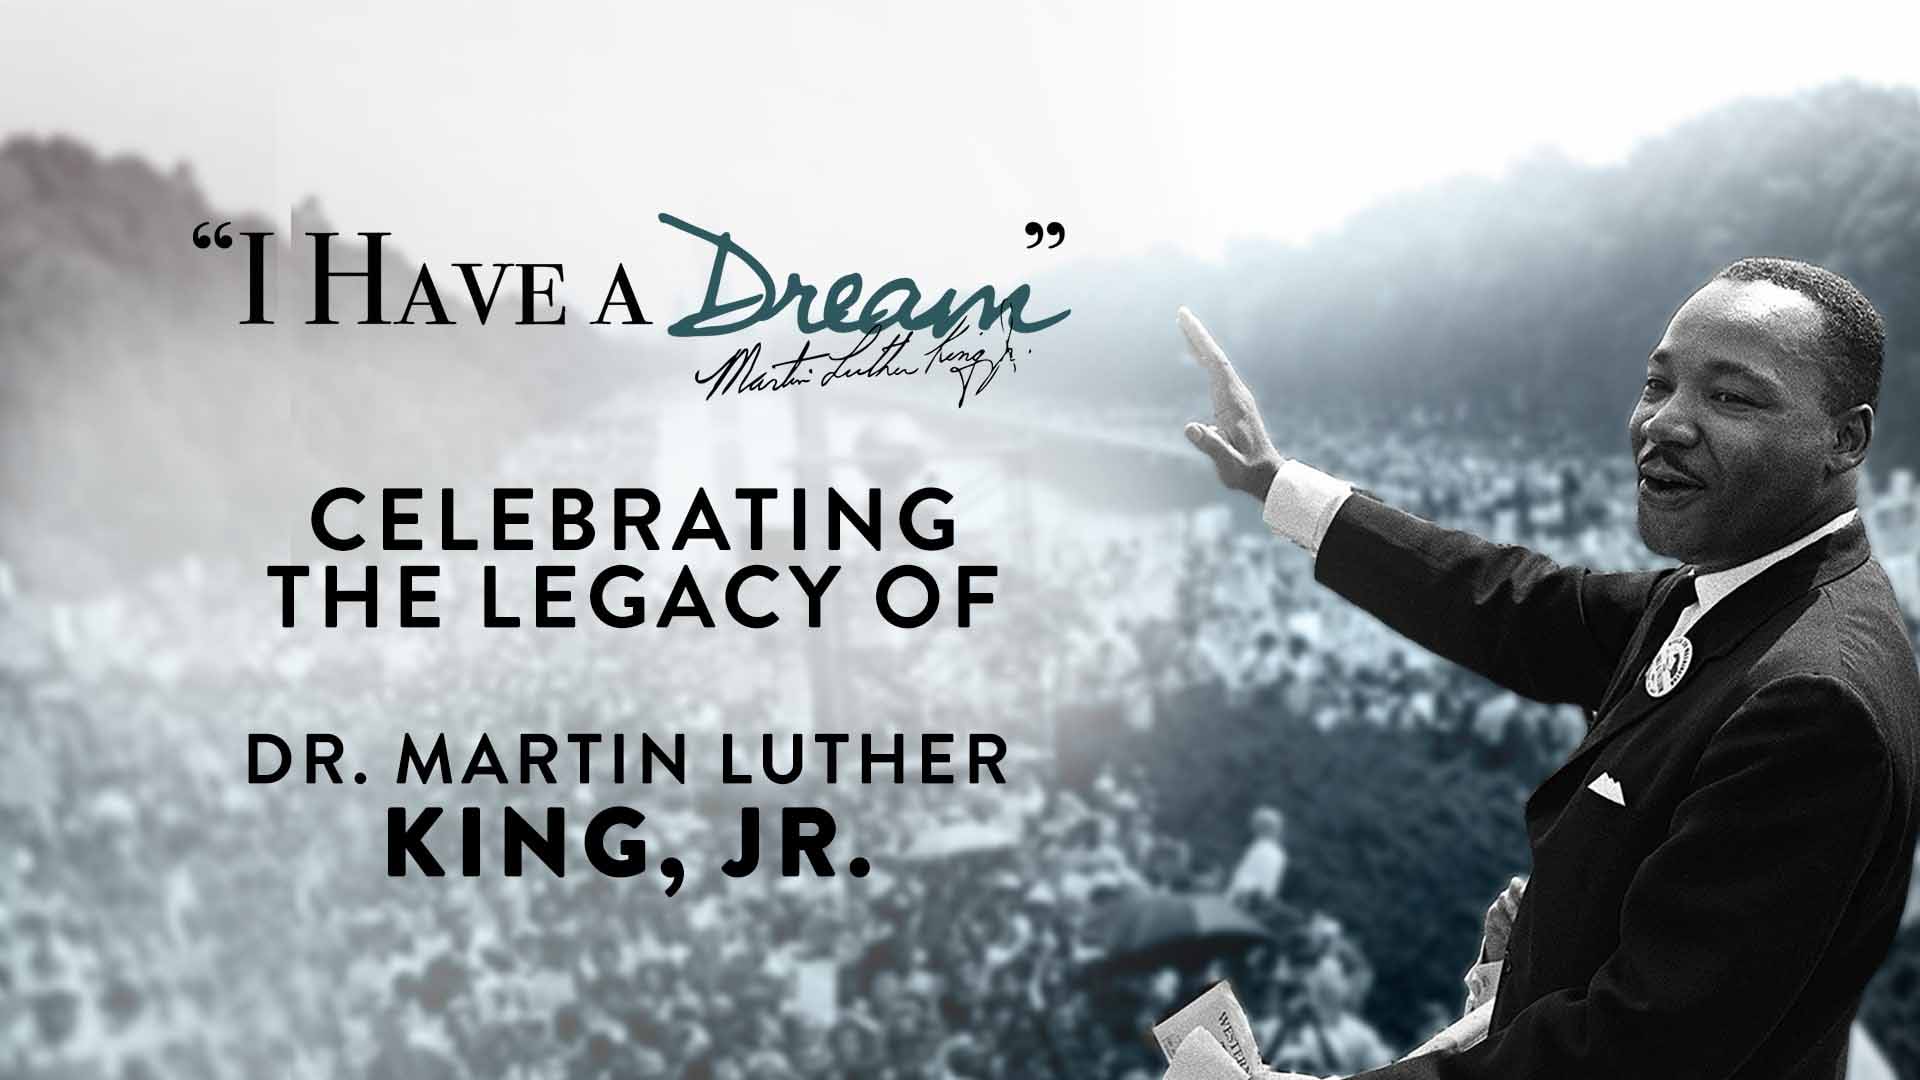 i_have_a_dream_honouring_dr_martin_luther_king_jr.jpeg